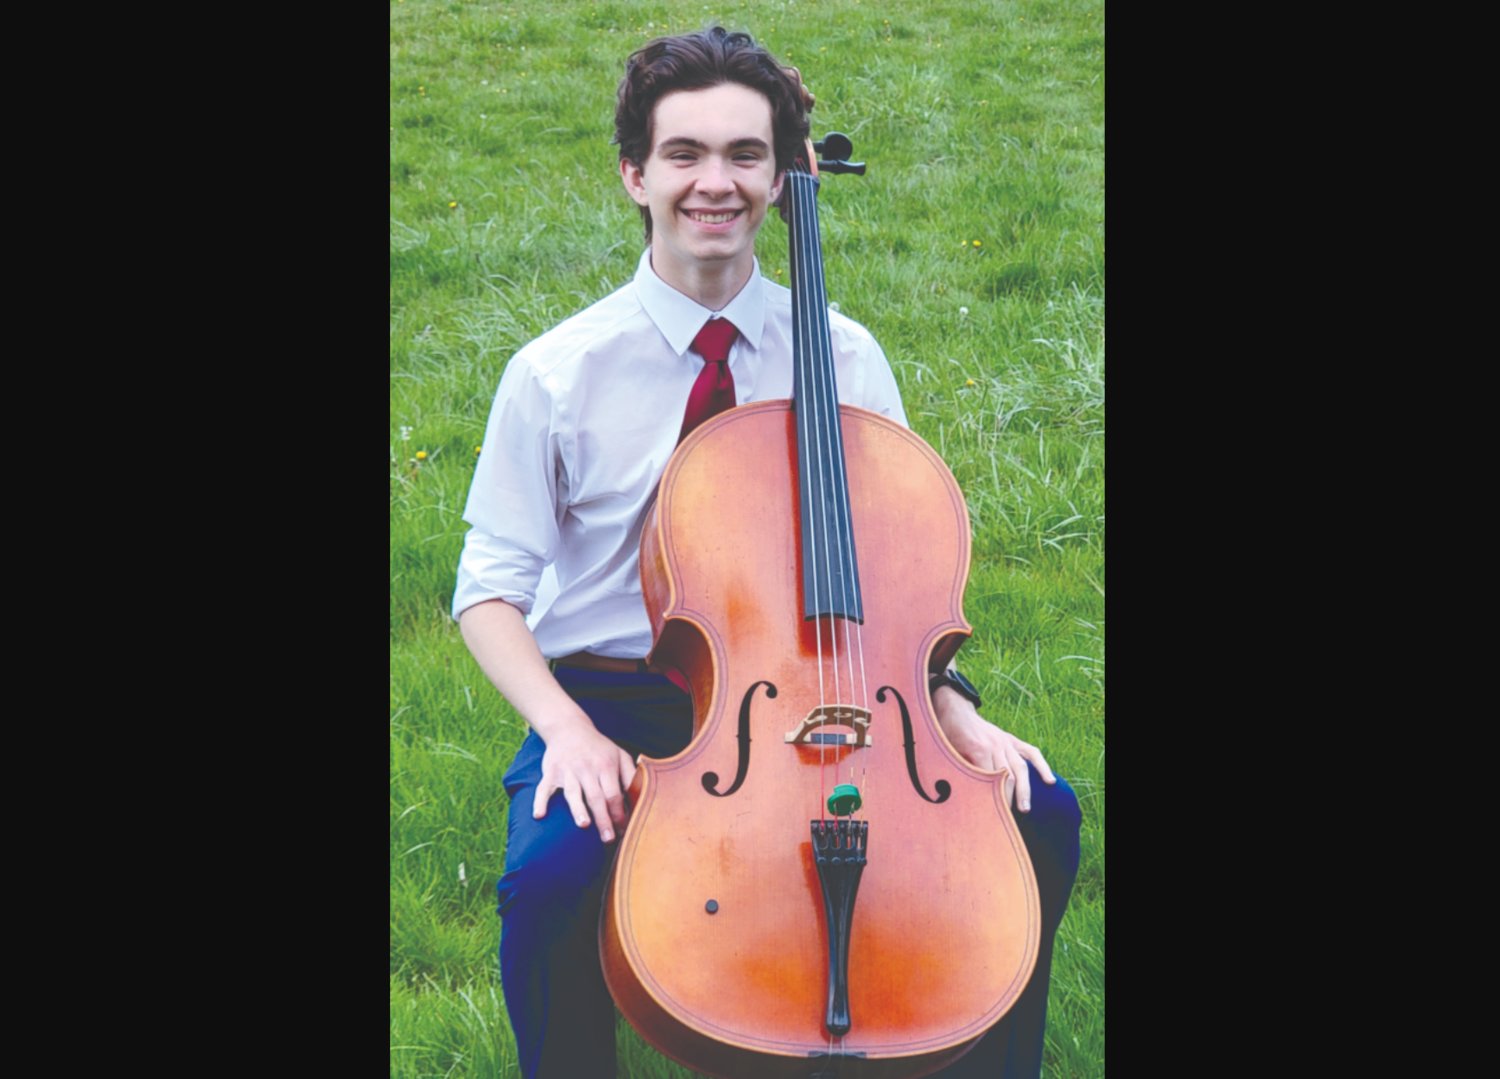 Included in the concert will be Jordan Stout, a 16-year-old from Adna who will be performing the Saint Saens Concerto for Violincello.